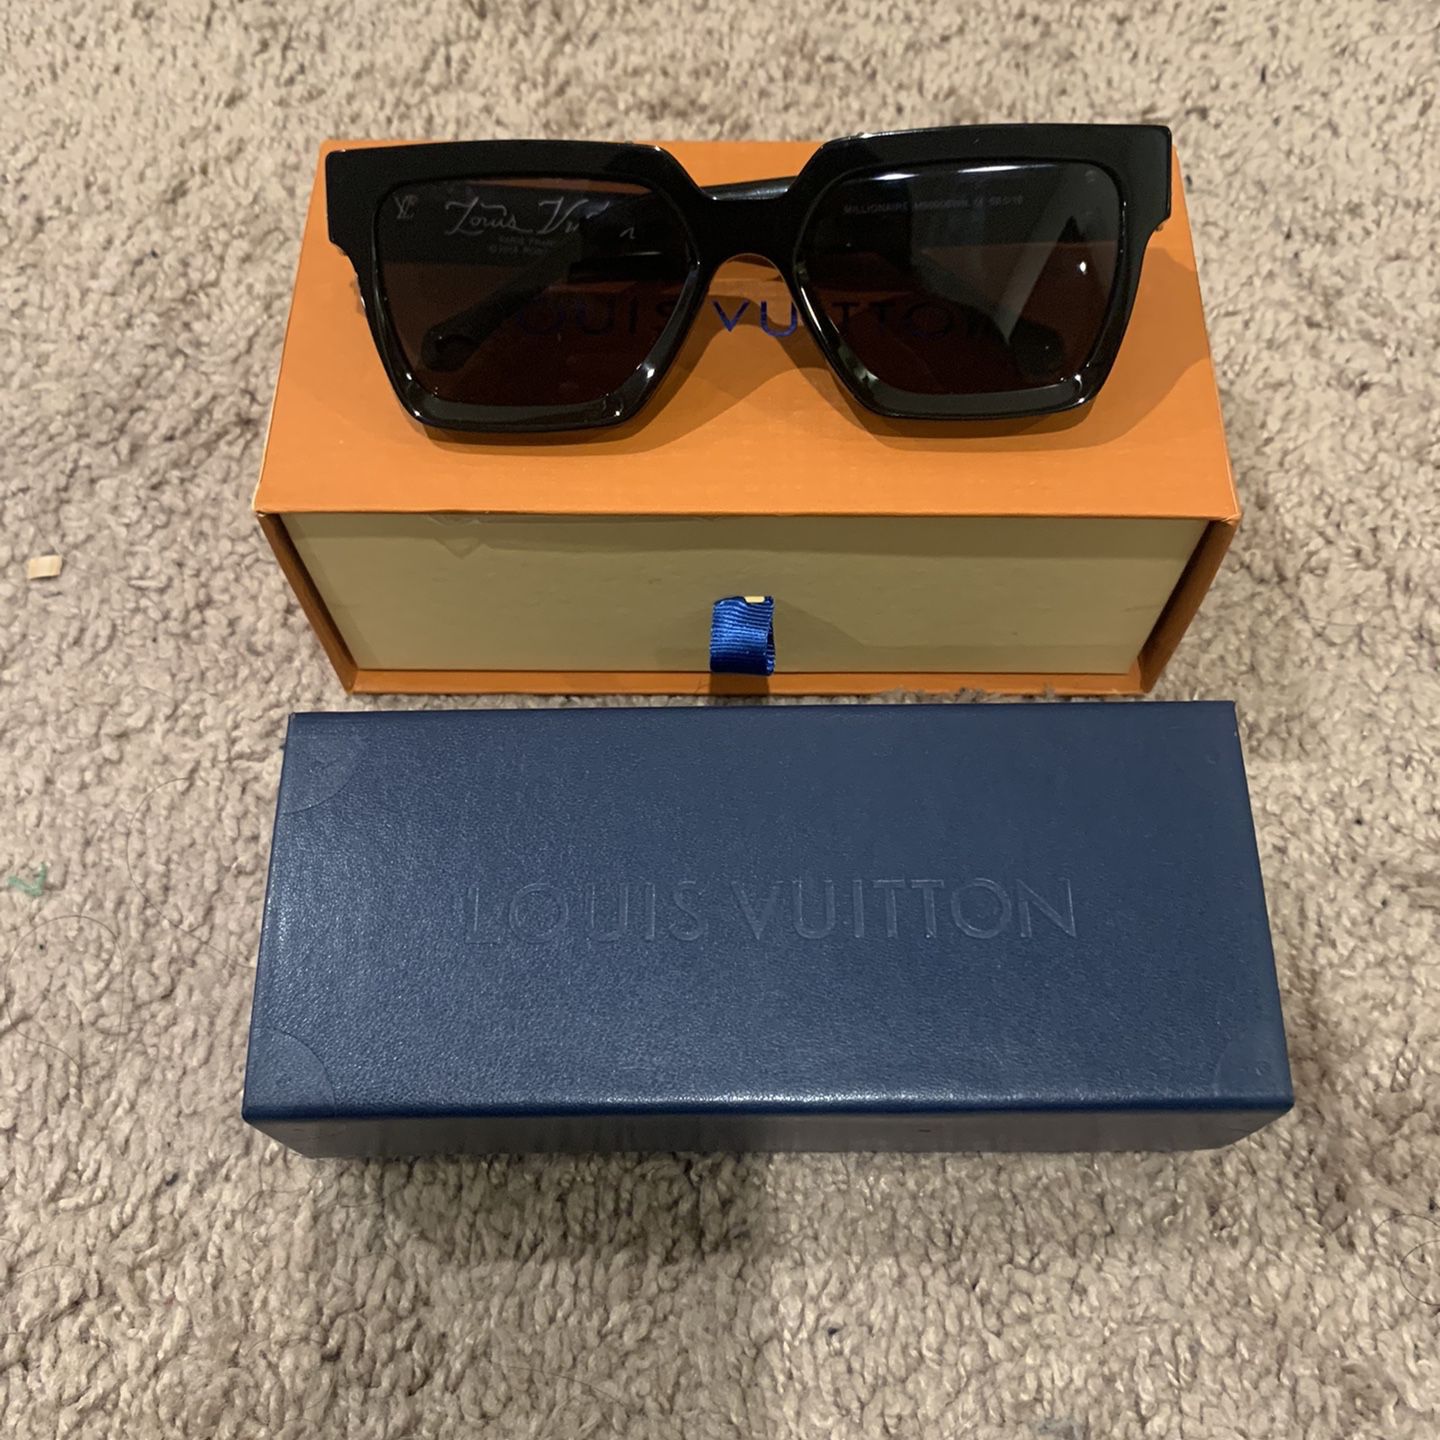 Louis. Vuitton 1.1 Million Sunglasses Case for Sale in Glendale Heights, IL  - OfferUp